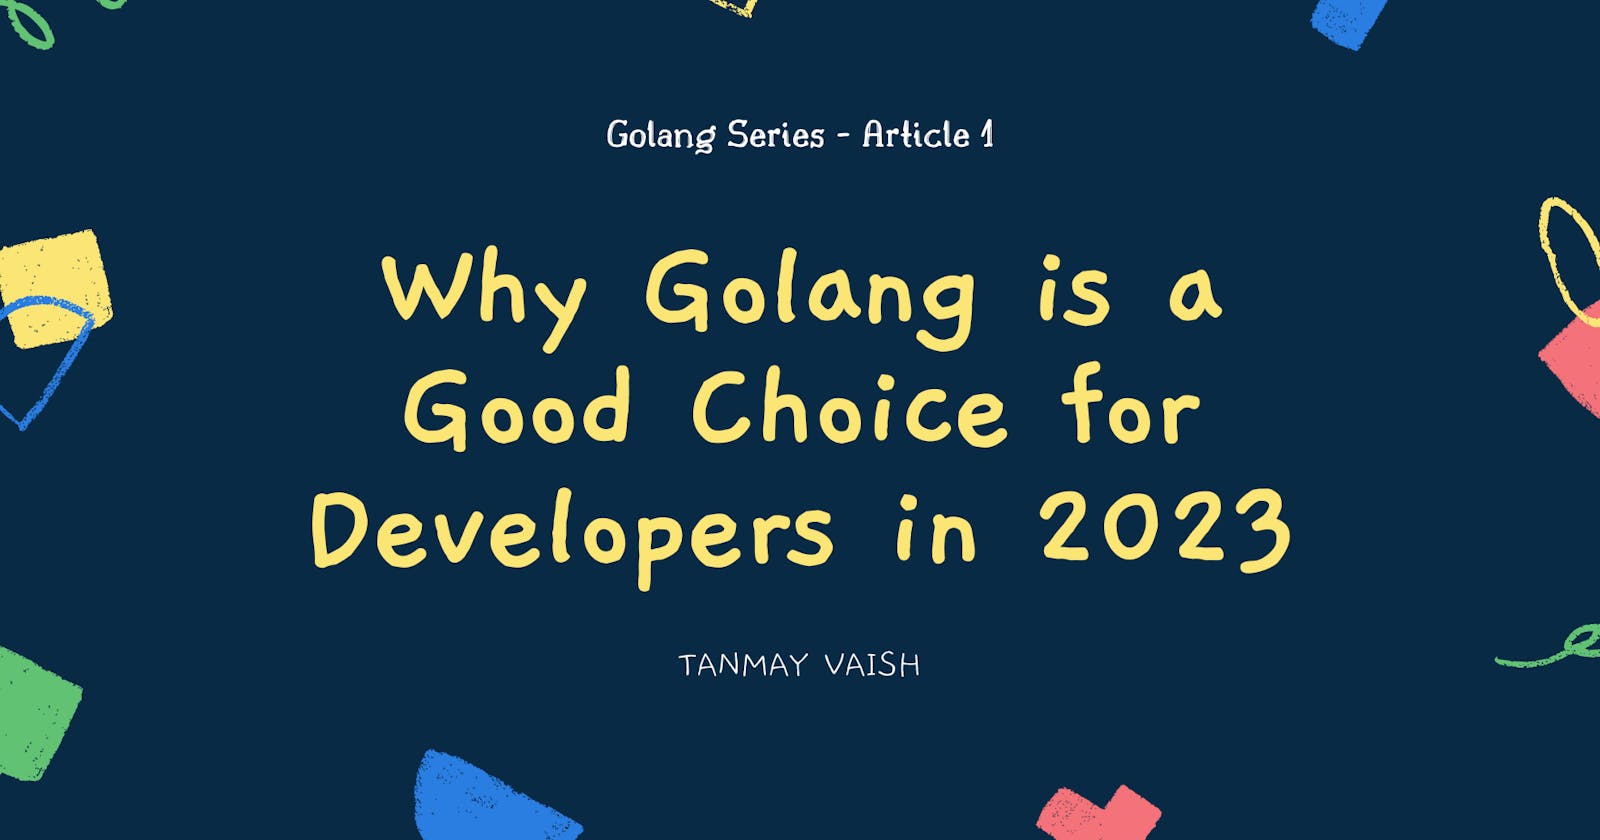 Why Golang is a Good Choice for Developers in 2023